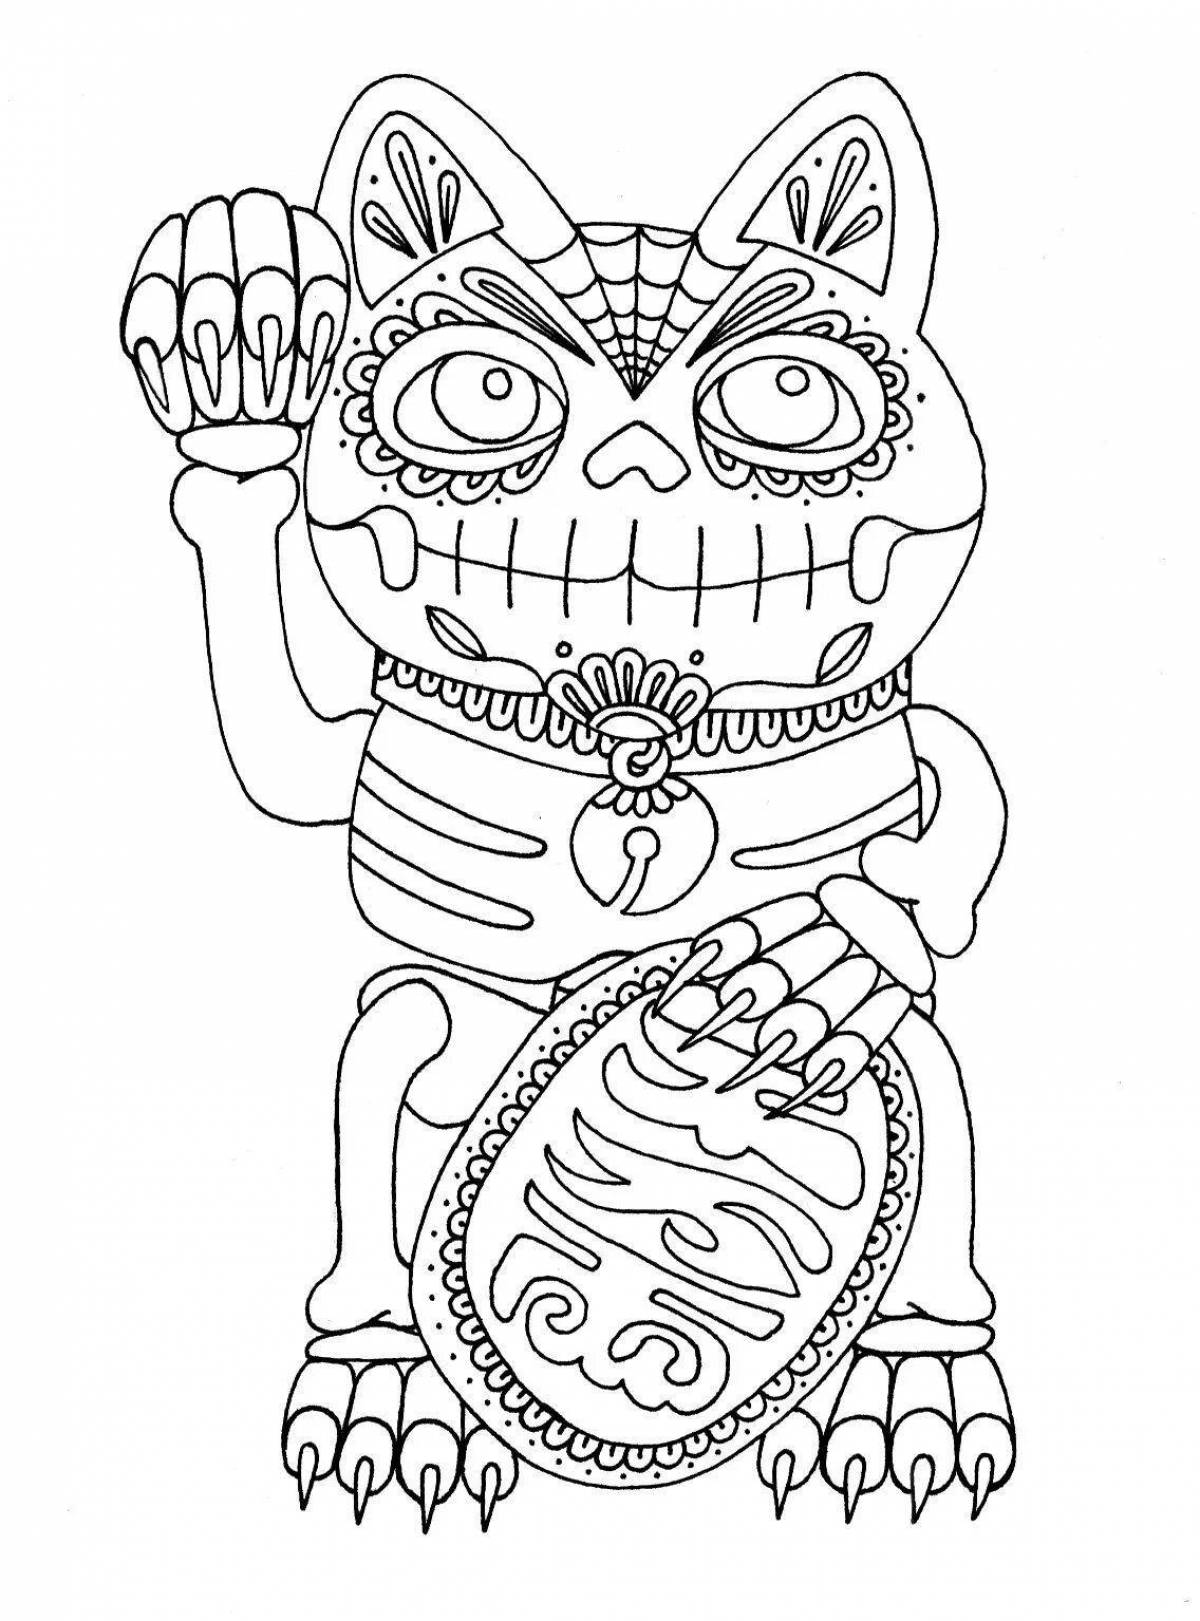 Chinese cat coloring book